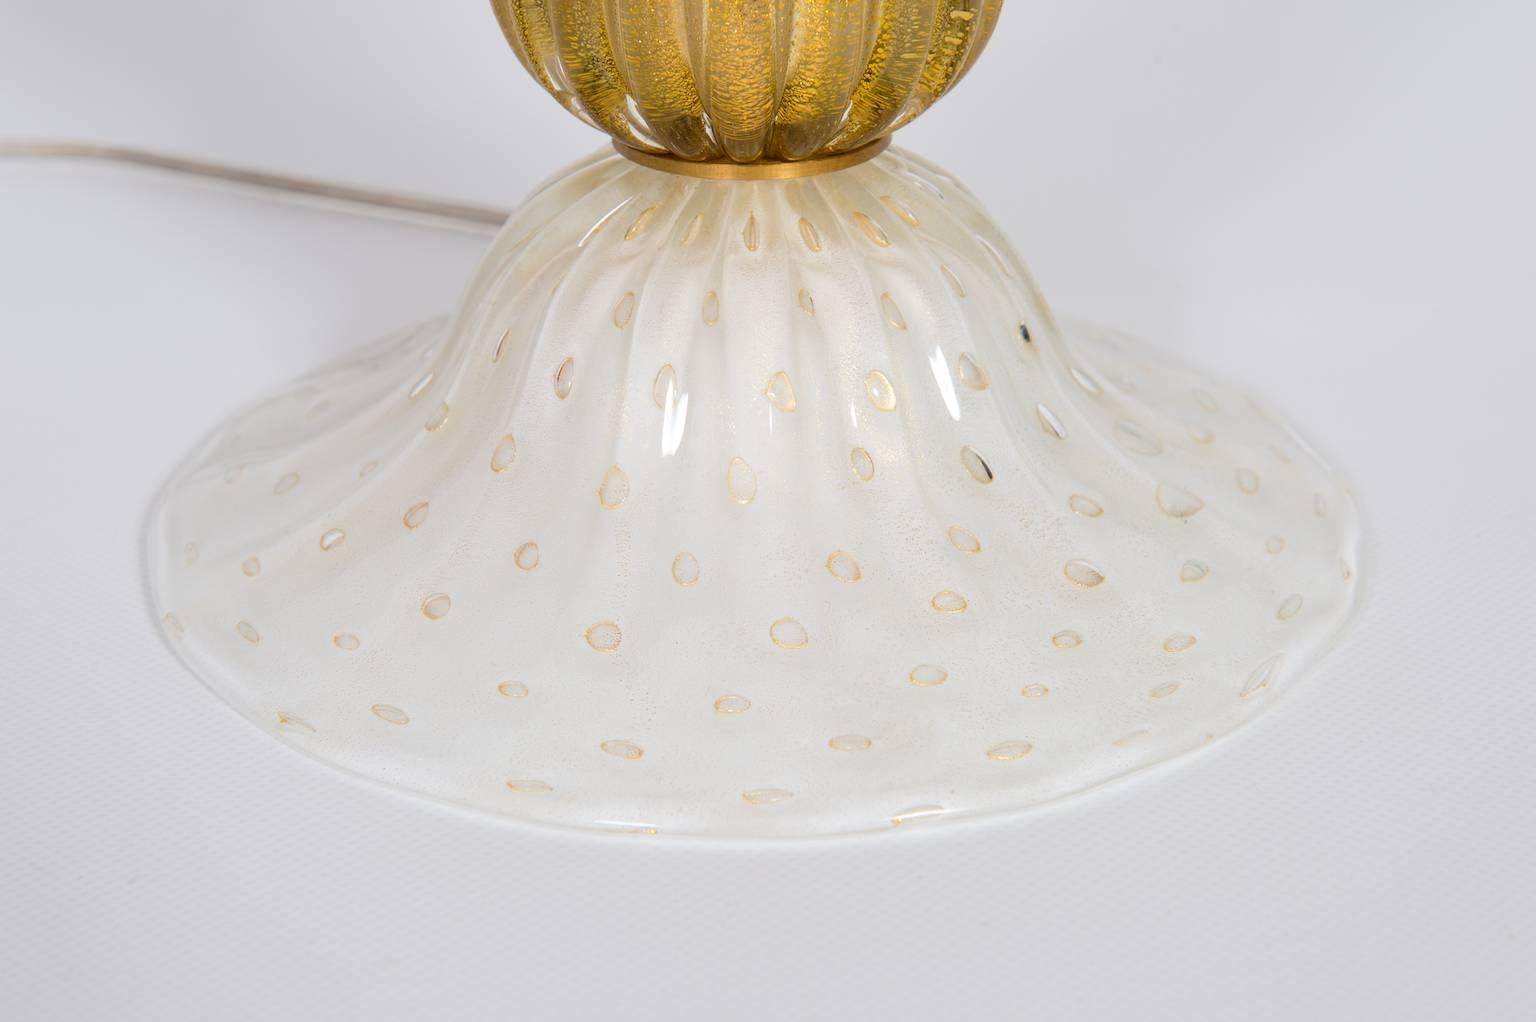 Art Deco Italian Table Lamp in Blown Murano Glass, White and 24kt Gold Finishes, 1970s For Sale